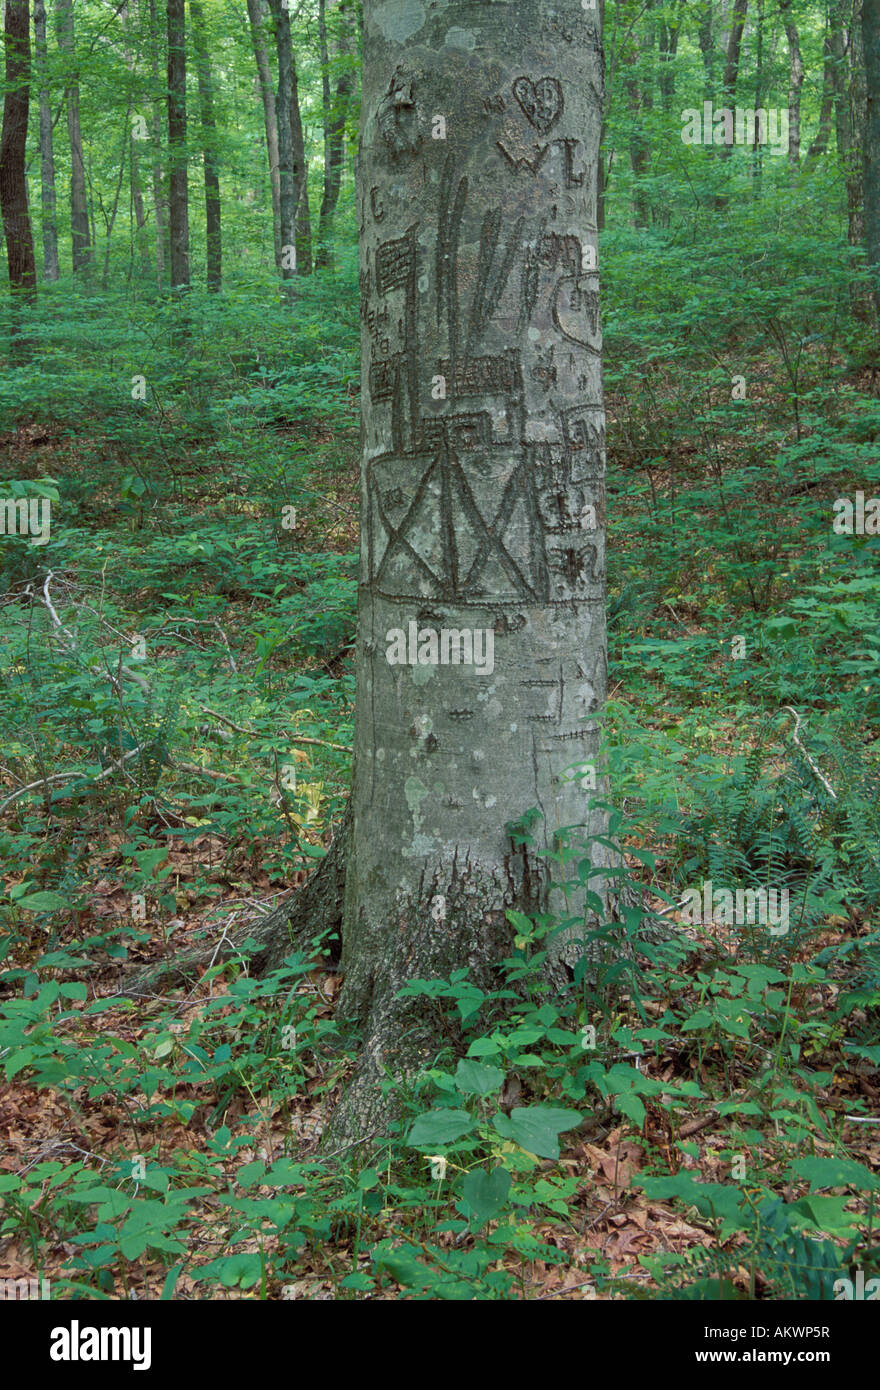 Tree with graffiti carved in it Stock Photo